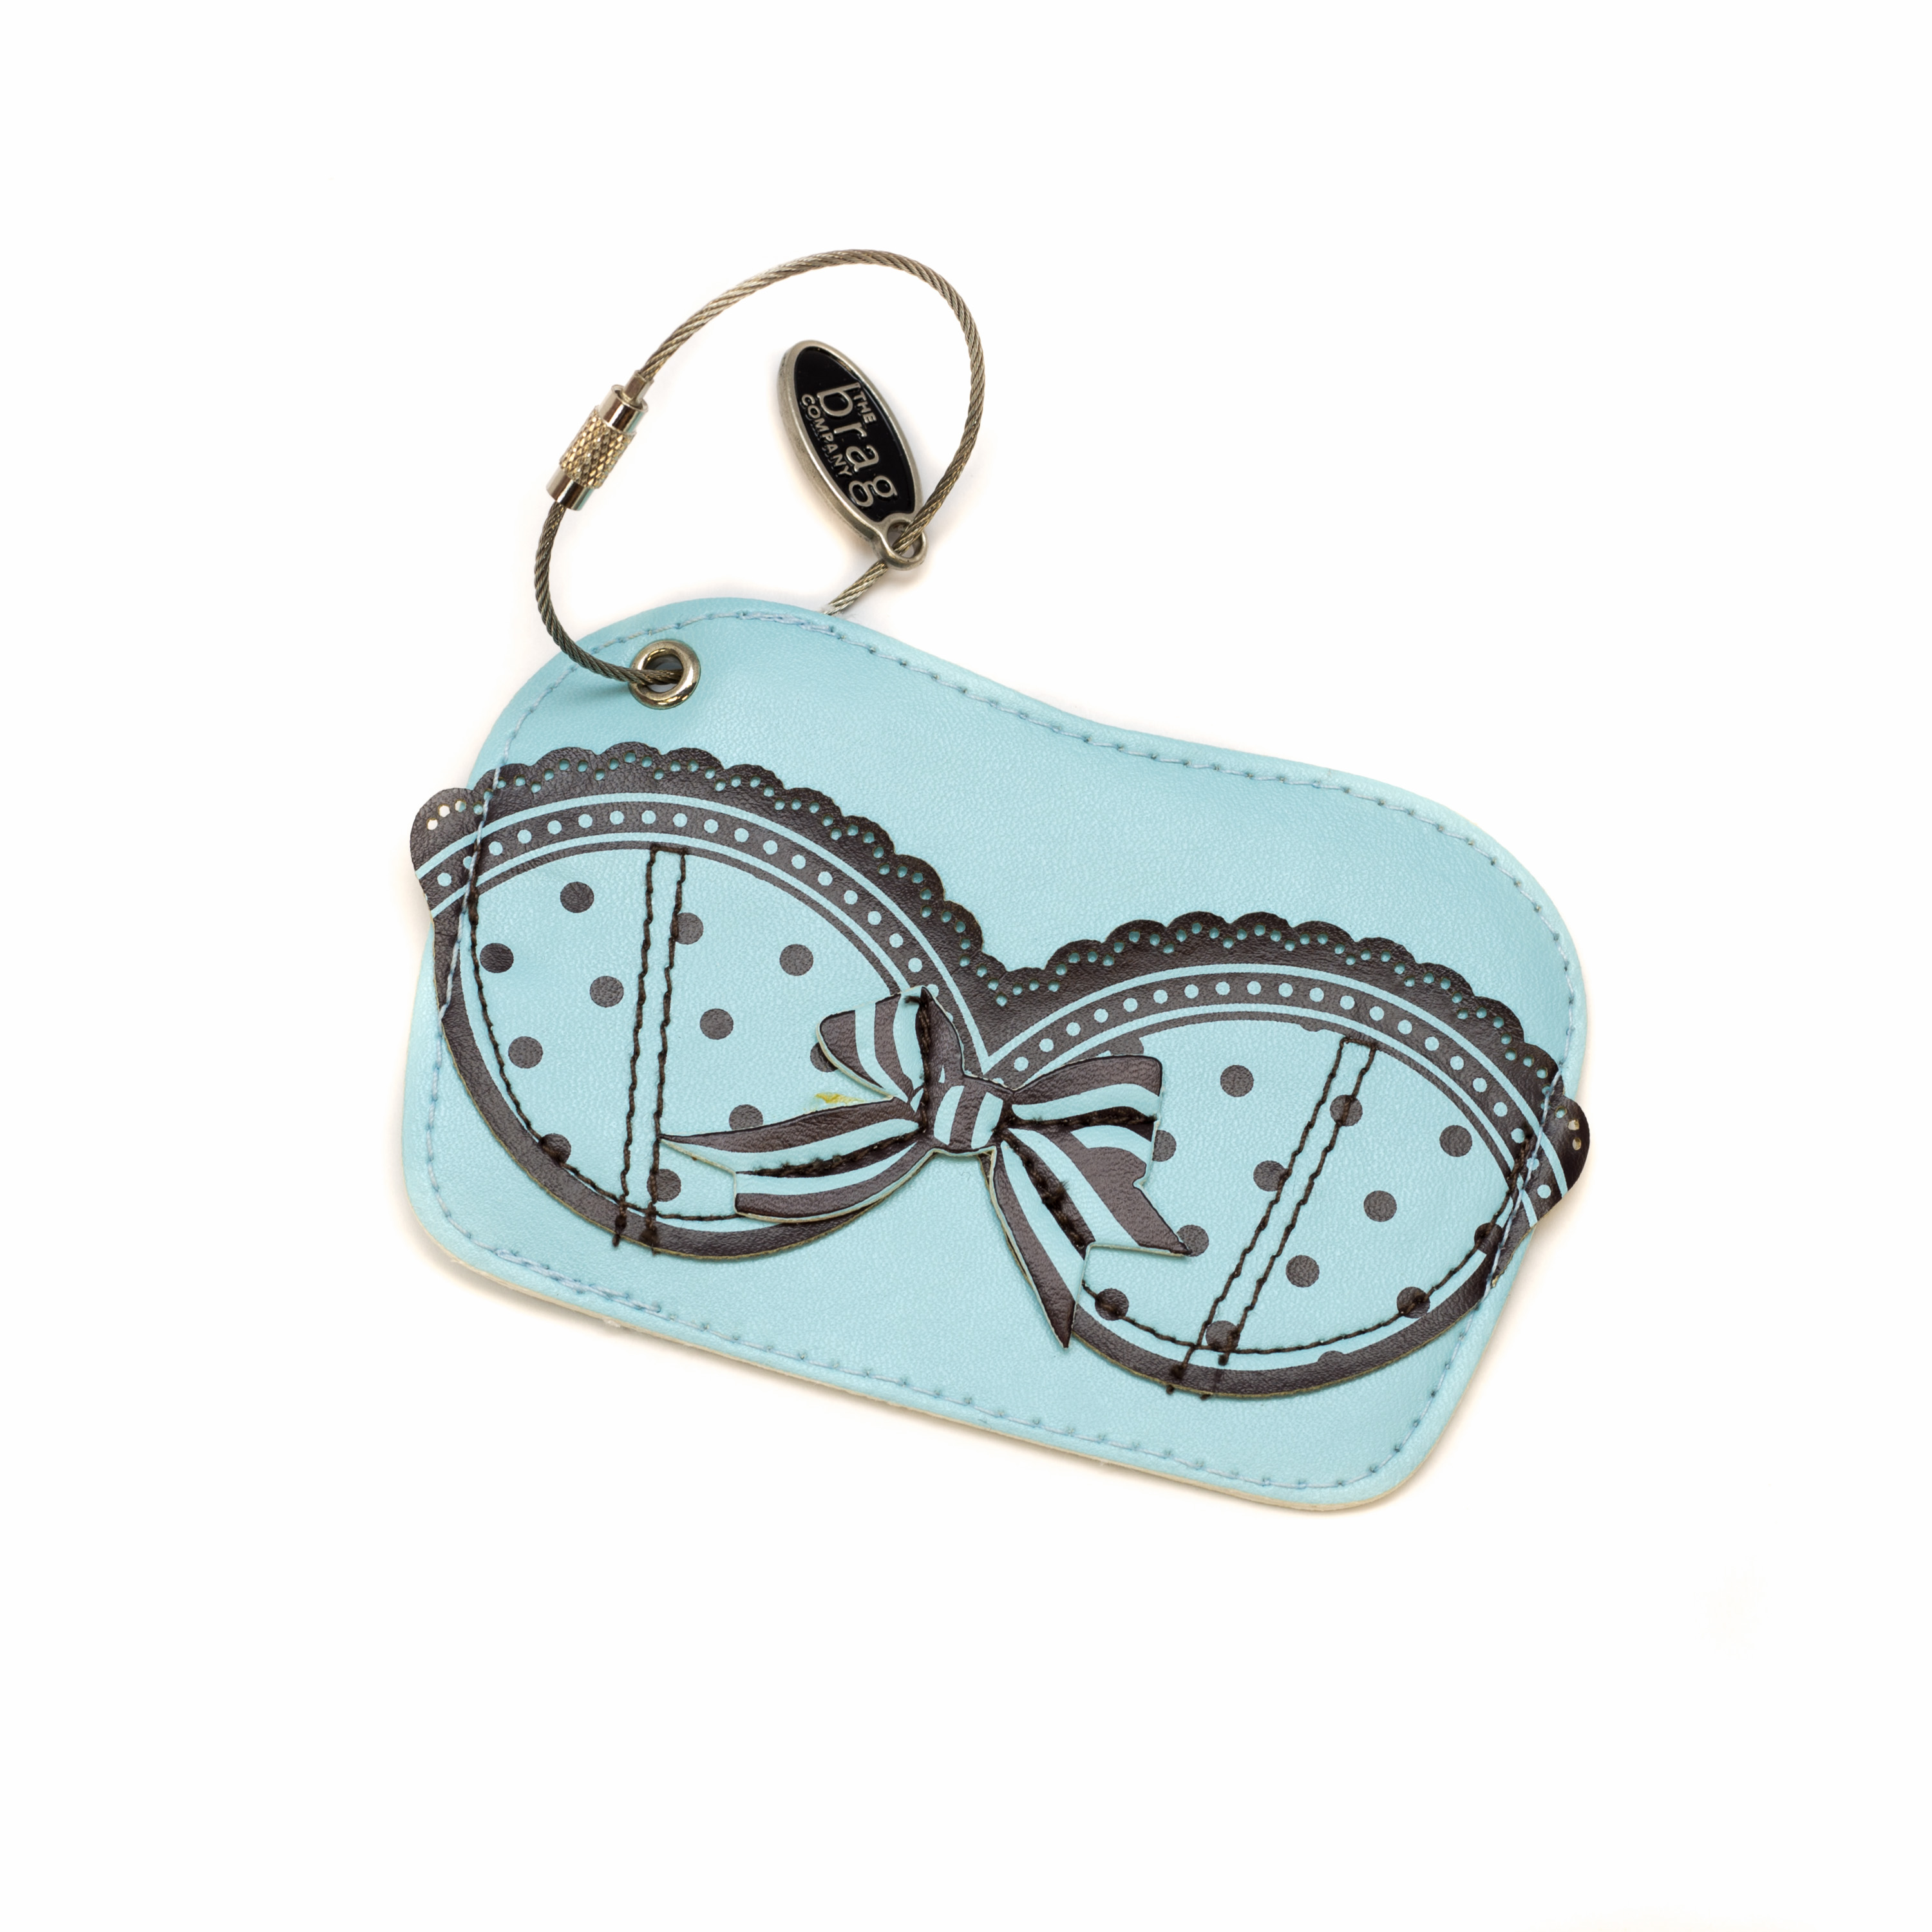 decorative luggage tag AJ-4 from Bra-Makers Supply front side shown